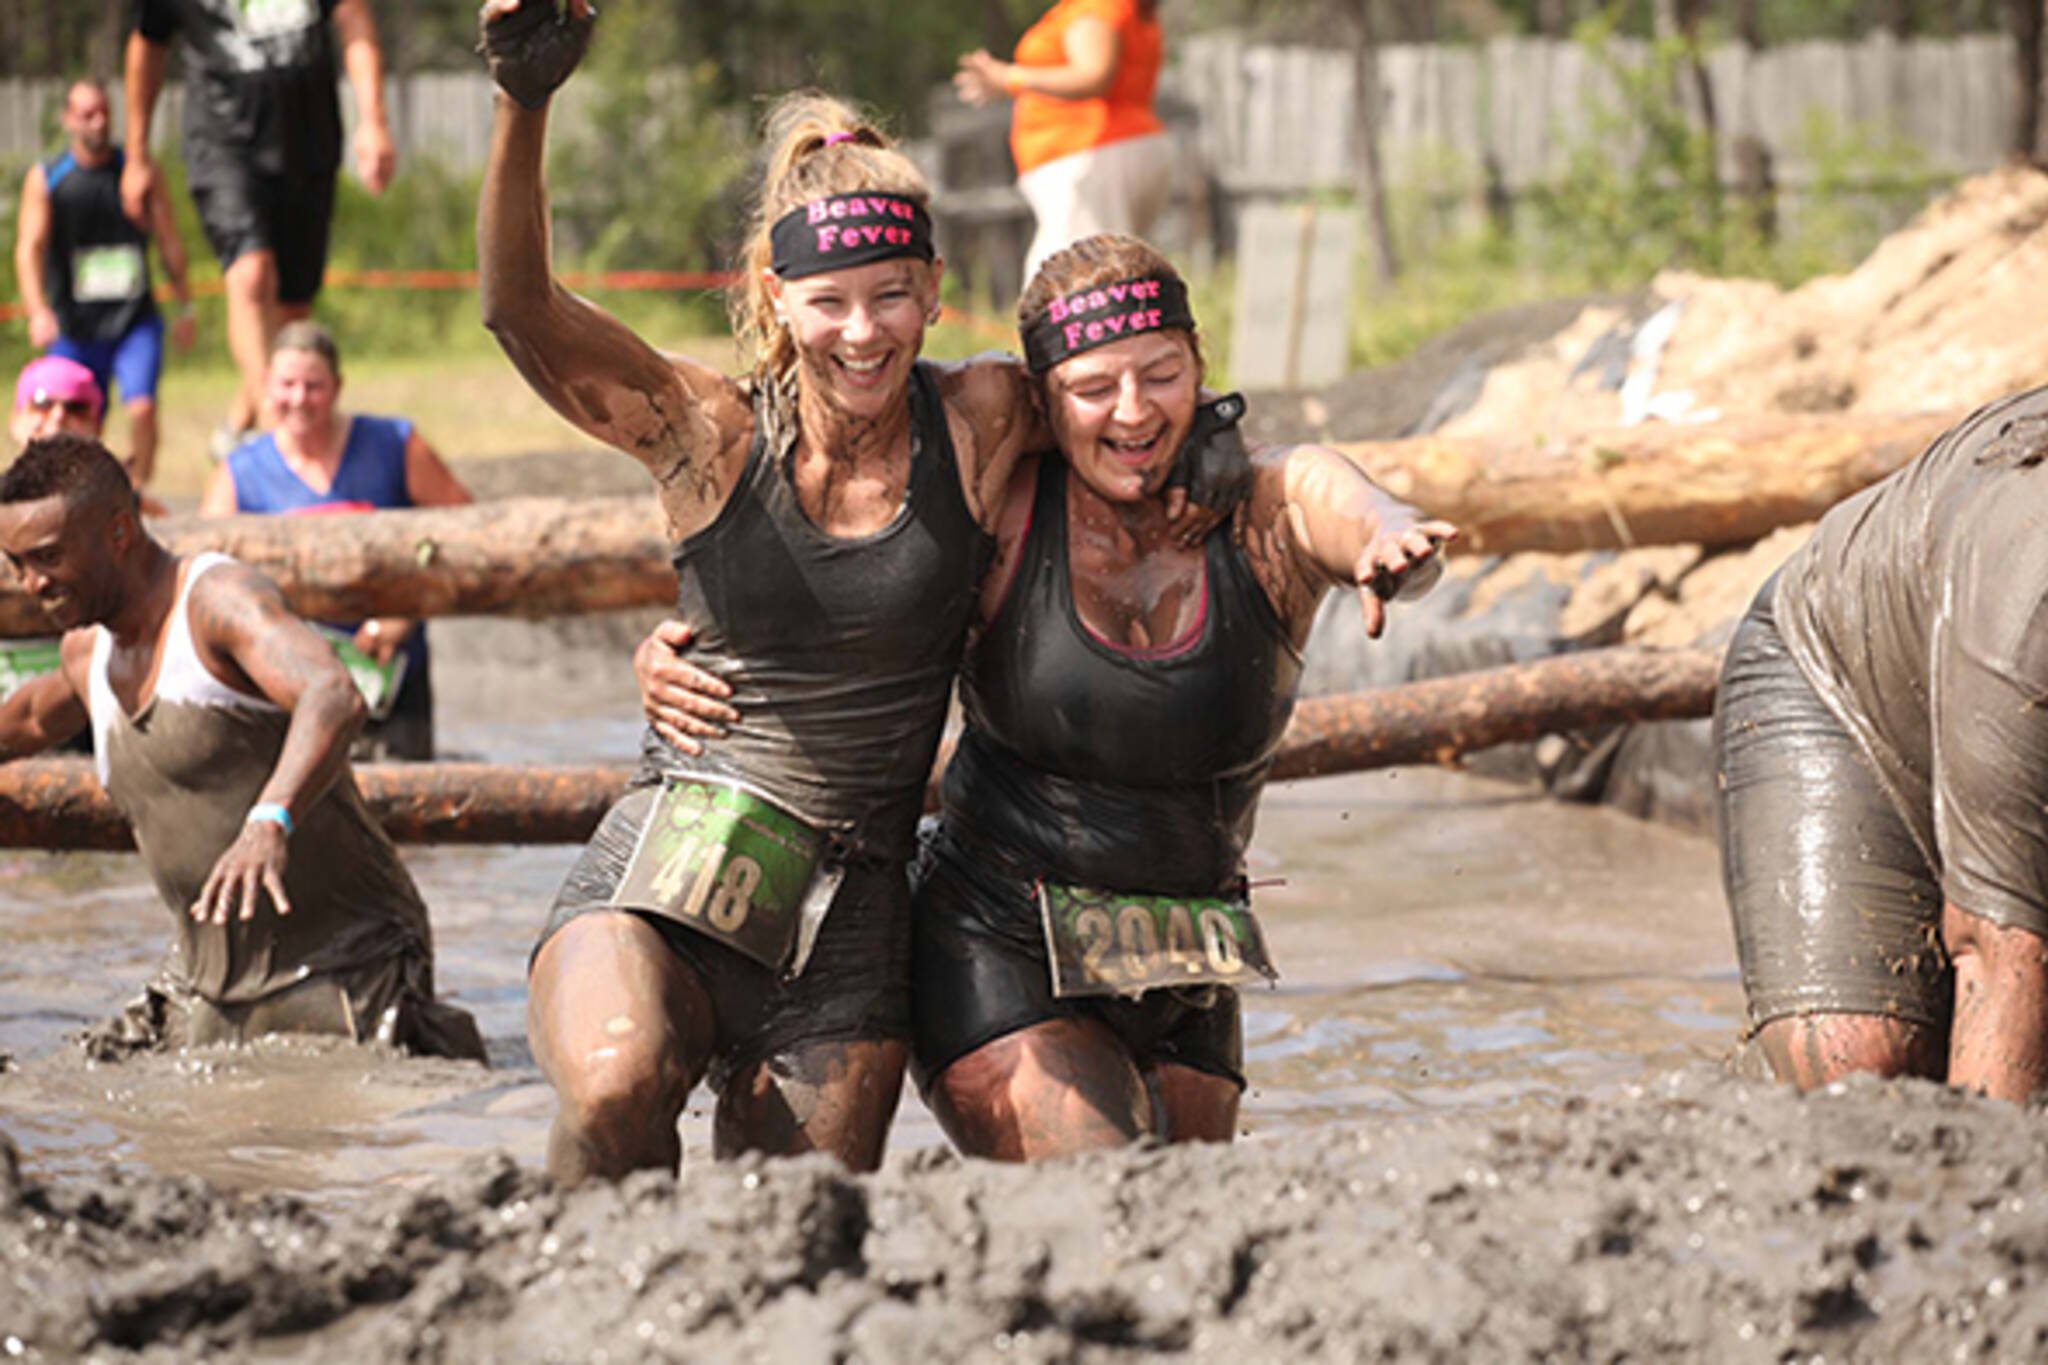 Massive mud race coming to Ontario Place this spring